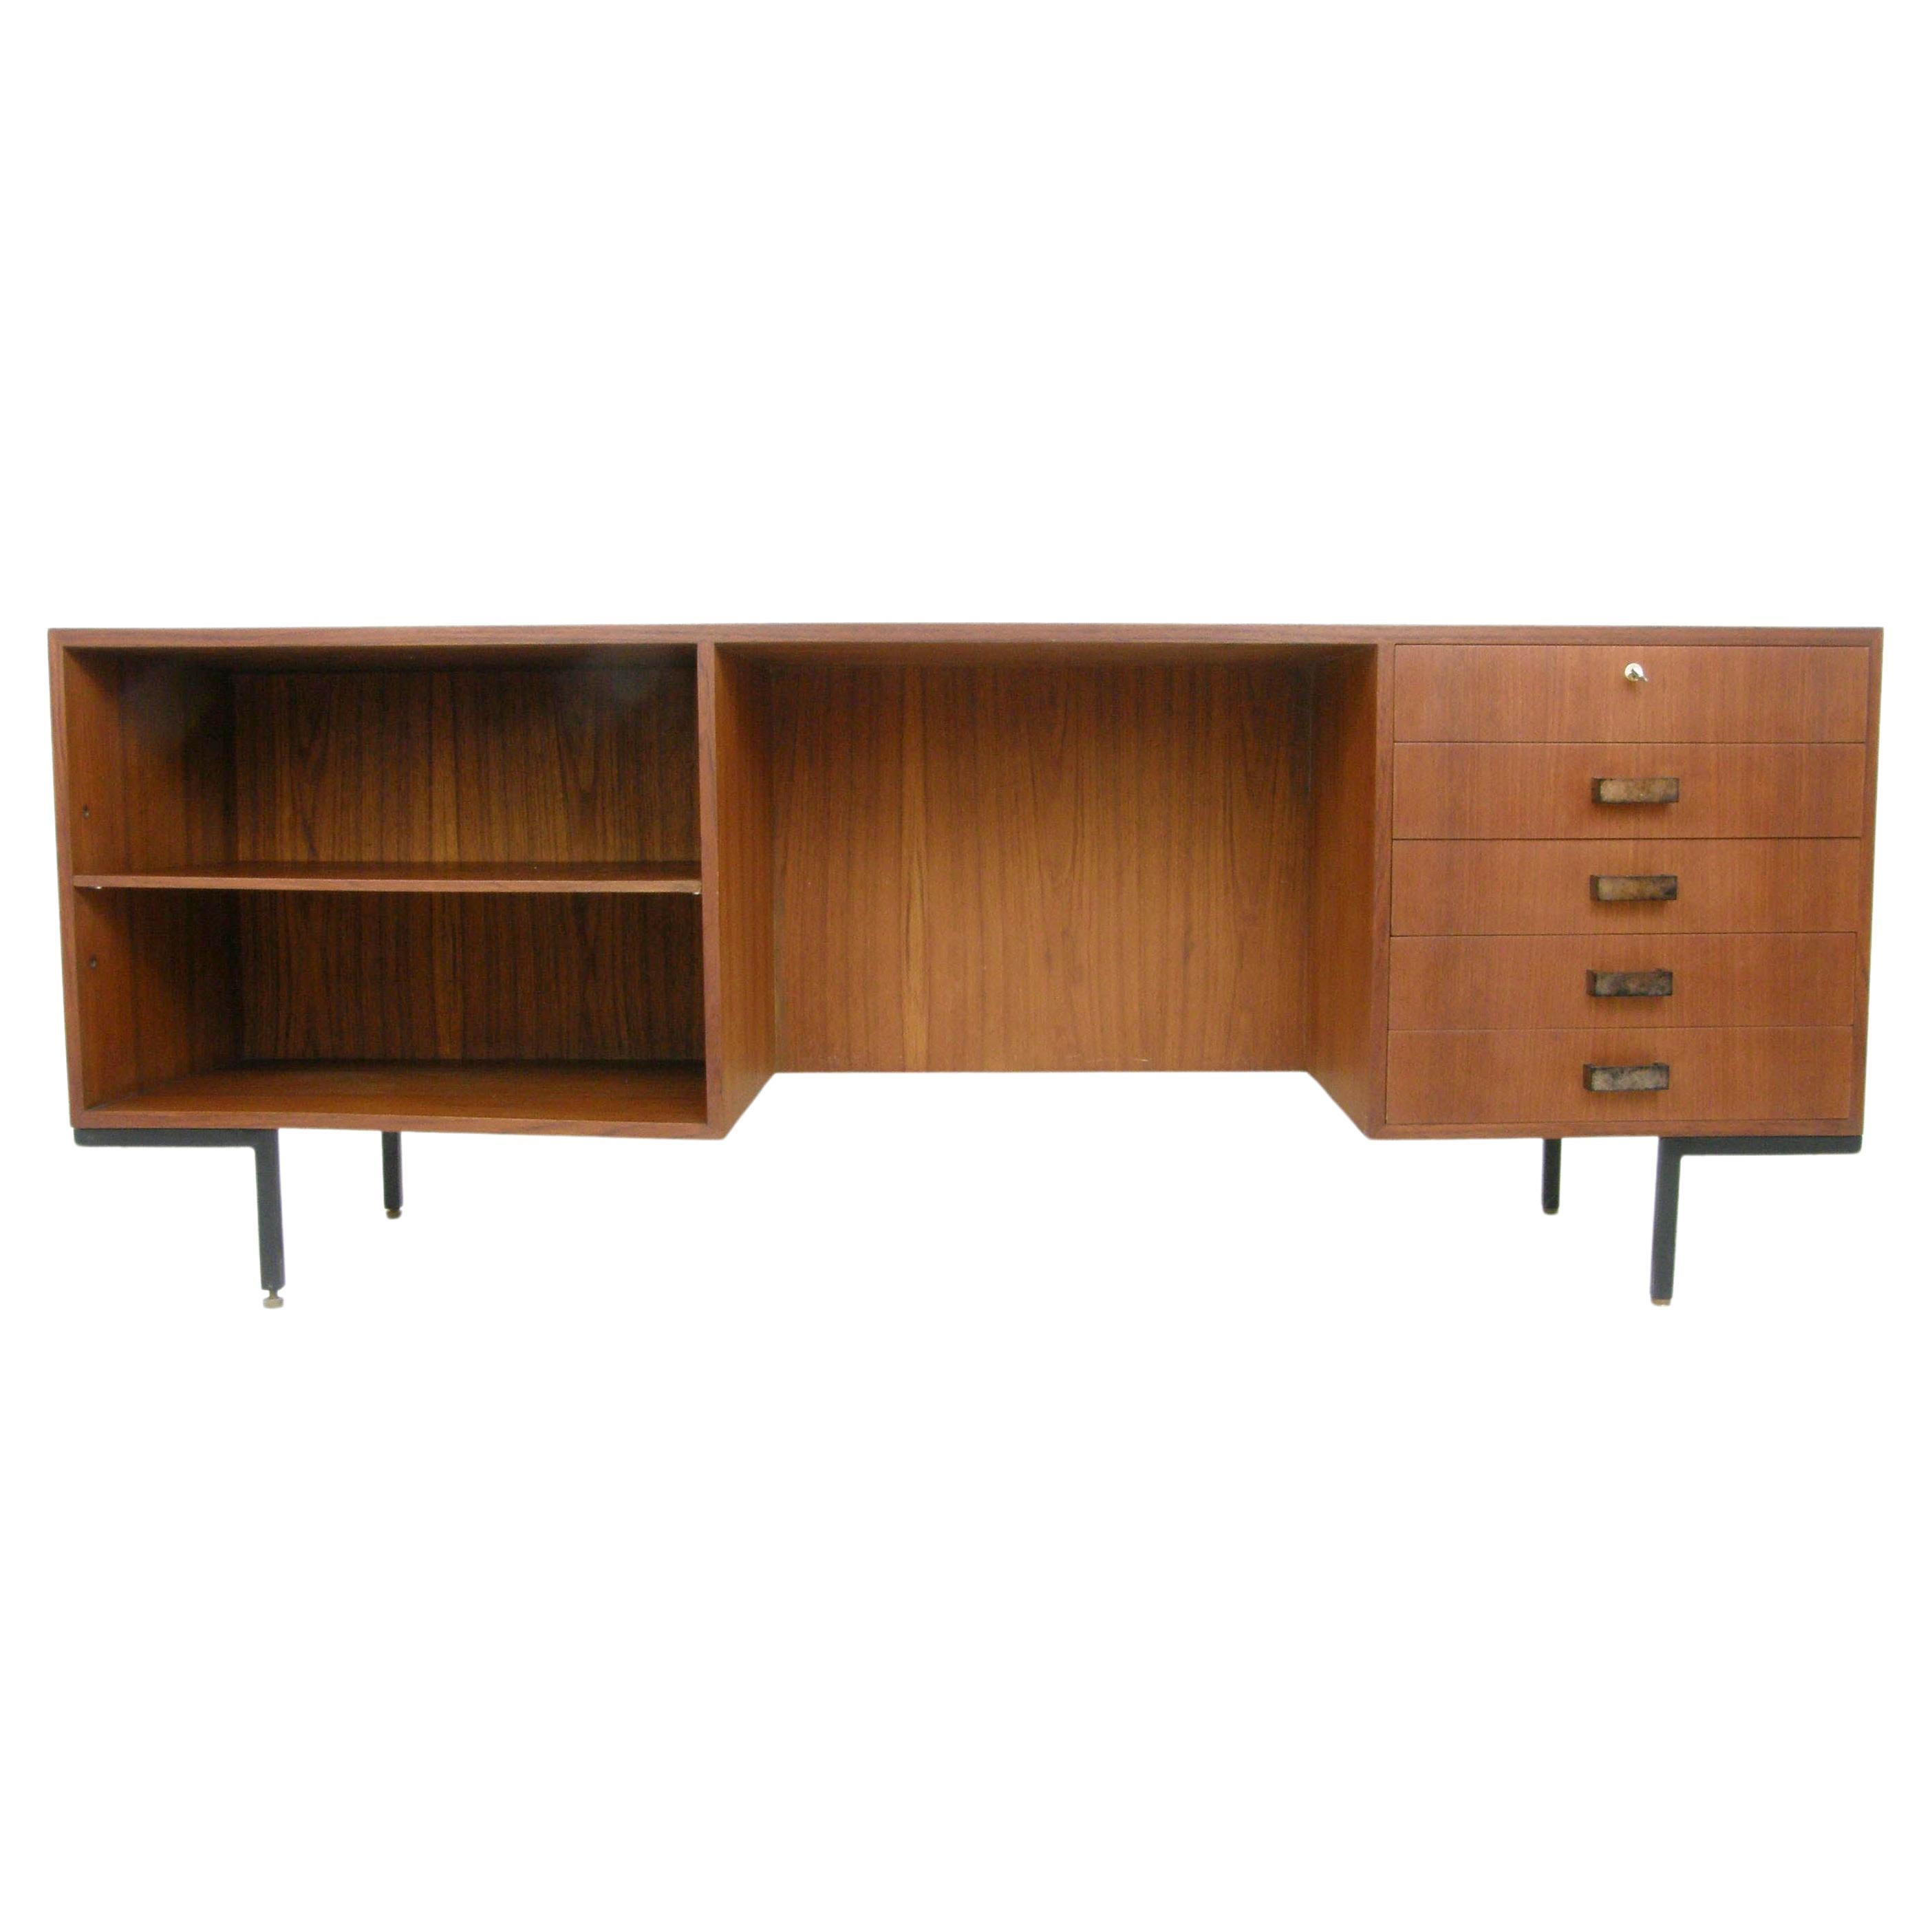 Vintage sideboard Paolo Tilche for Arform, italy 1960s For Sale